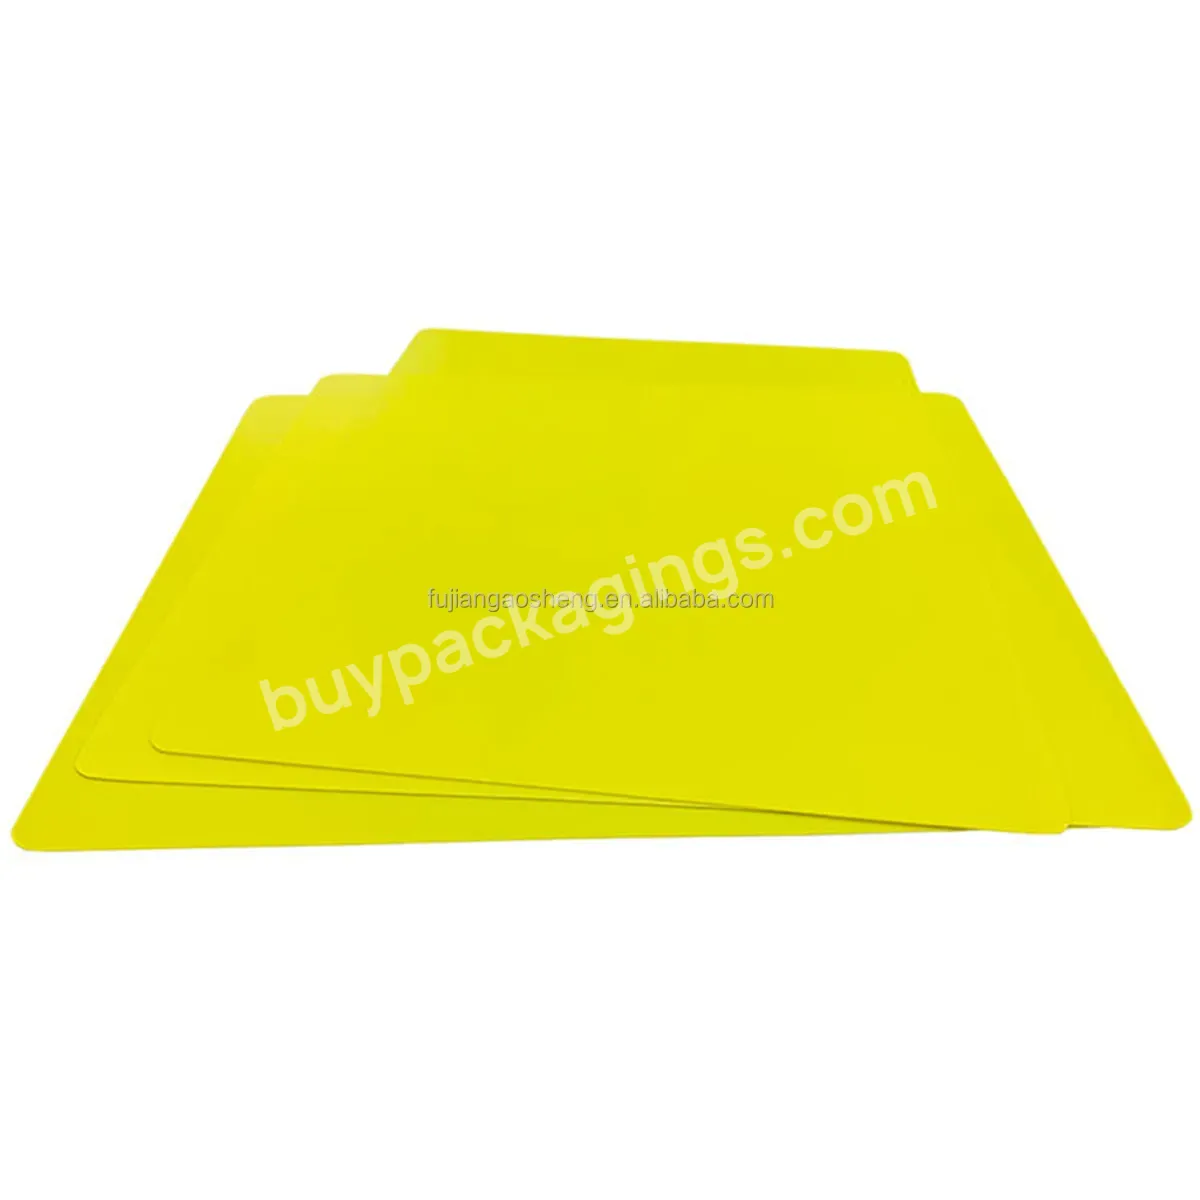 Beverage Customize Recyclable High Quality Pallet Sheet Pp Pads Pallet Non-slip Sheets For Cola Or Beer Plastic Layer Pad - Buy Beverage Moldable Plastic Layer Pad Sheets,Cola Or Beer Double Layer Pad Plastic Sheets,Non Slip Plastic Sheet For Cola Or